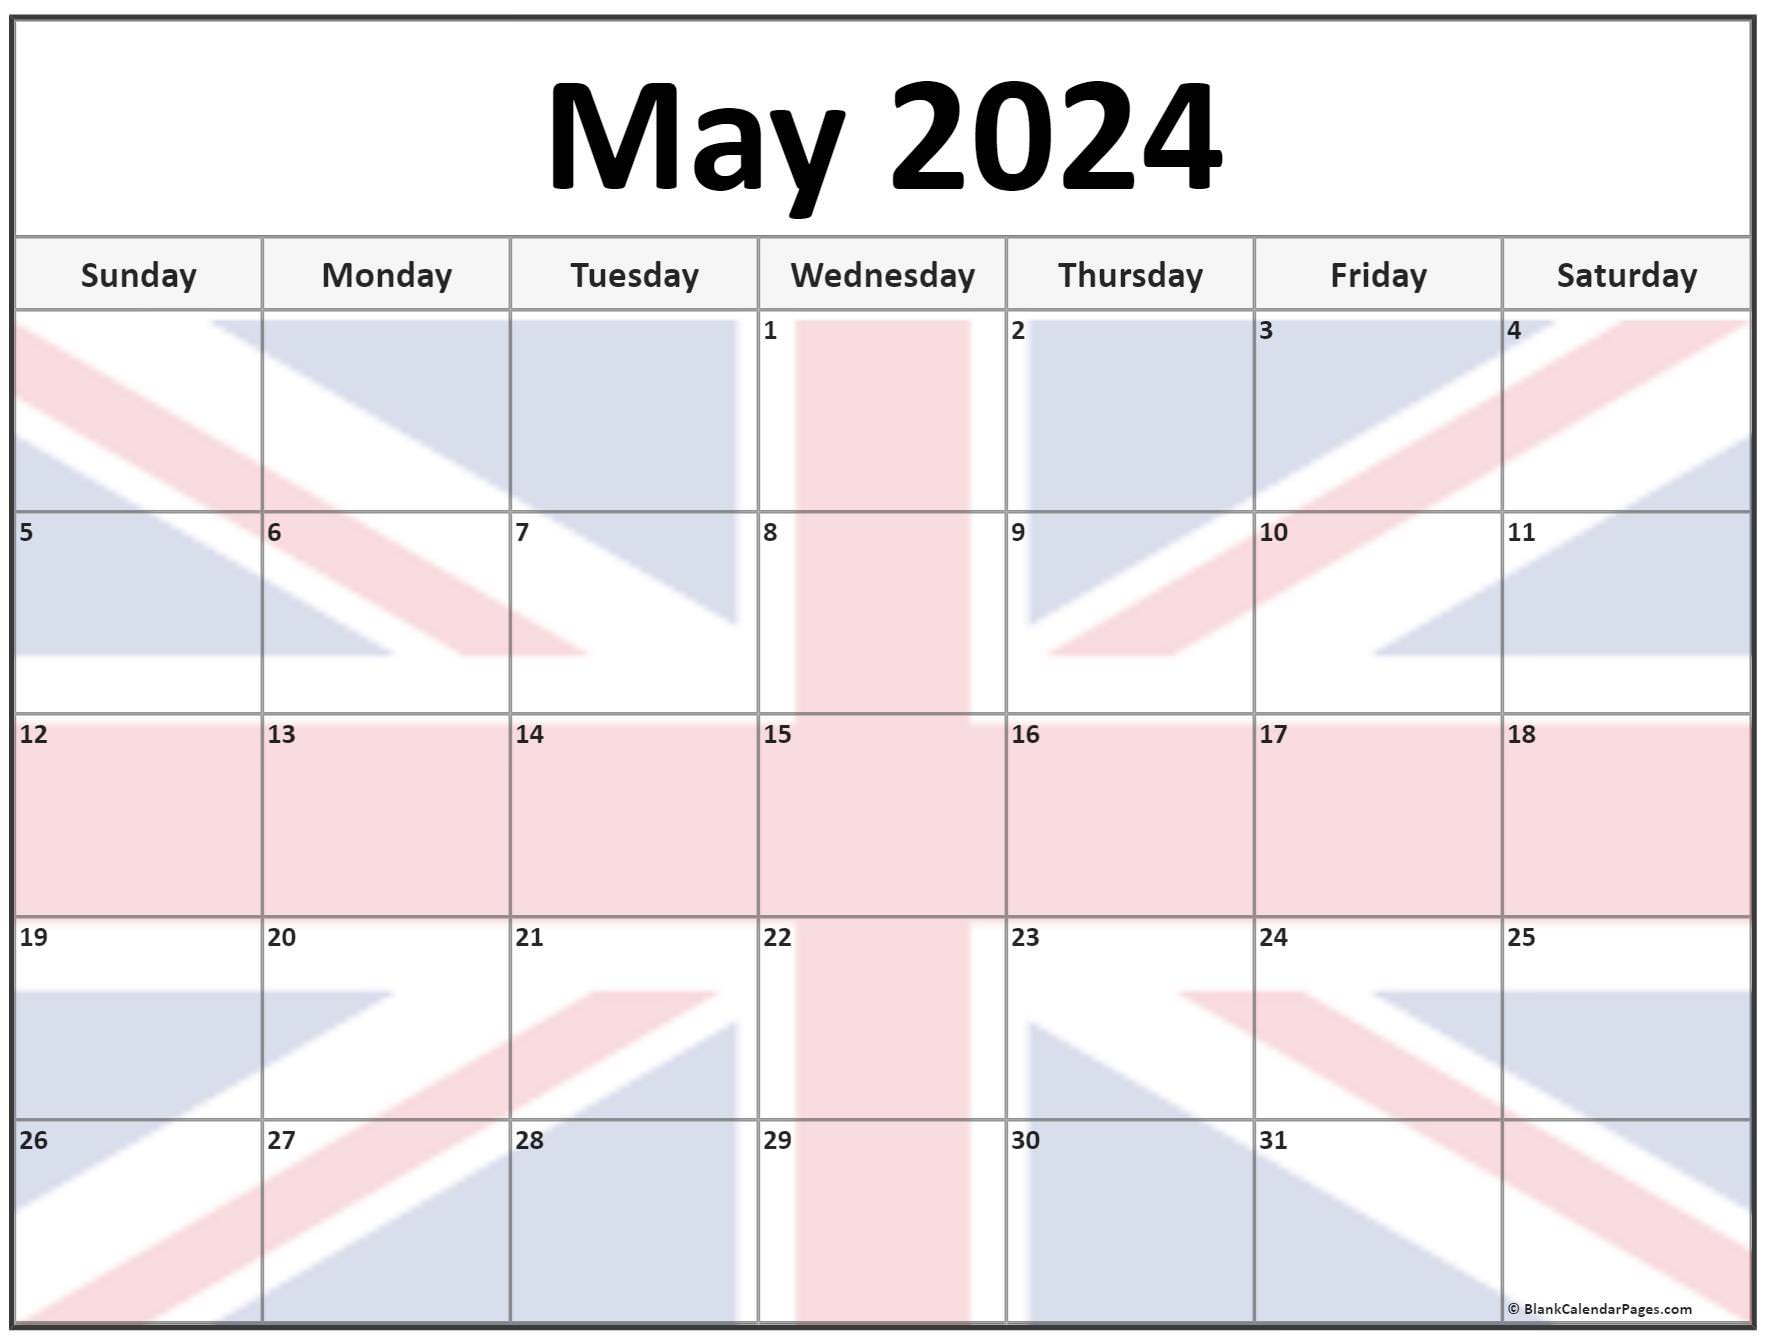 Collection of May 2023 photo calendars with image filters.